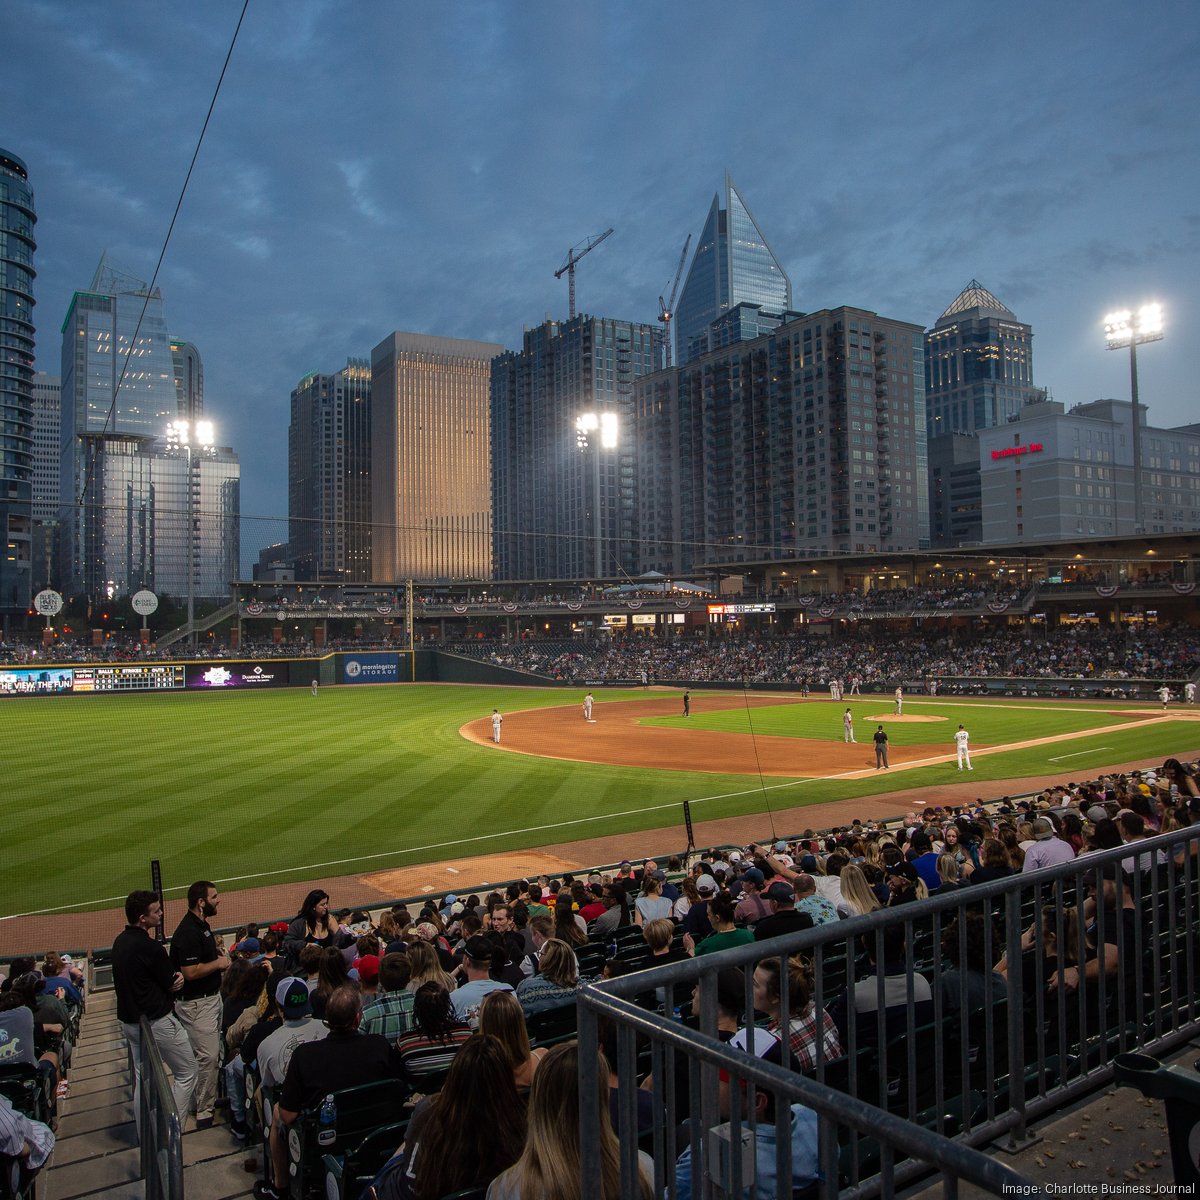 Charlotte Knights Fest April 2: meet Homer, play catch on the field, watch  a media softball game, more - Charlotte On The Cheap